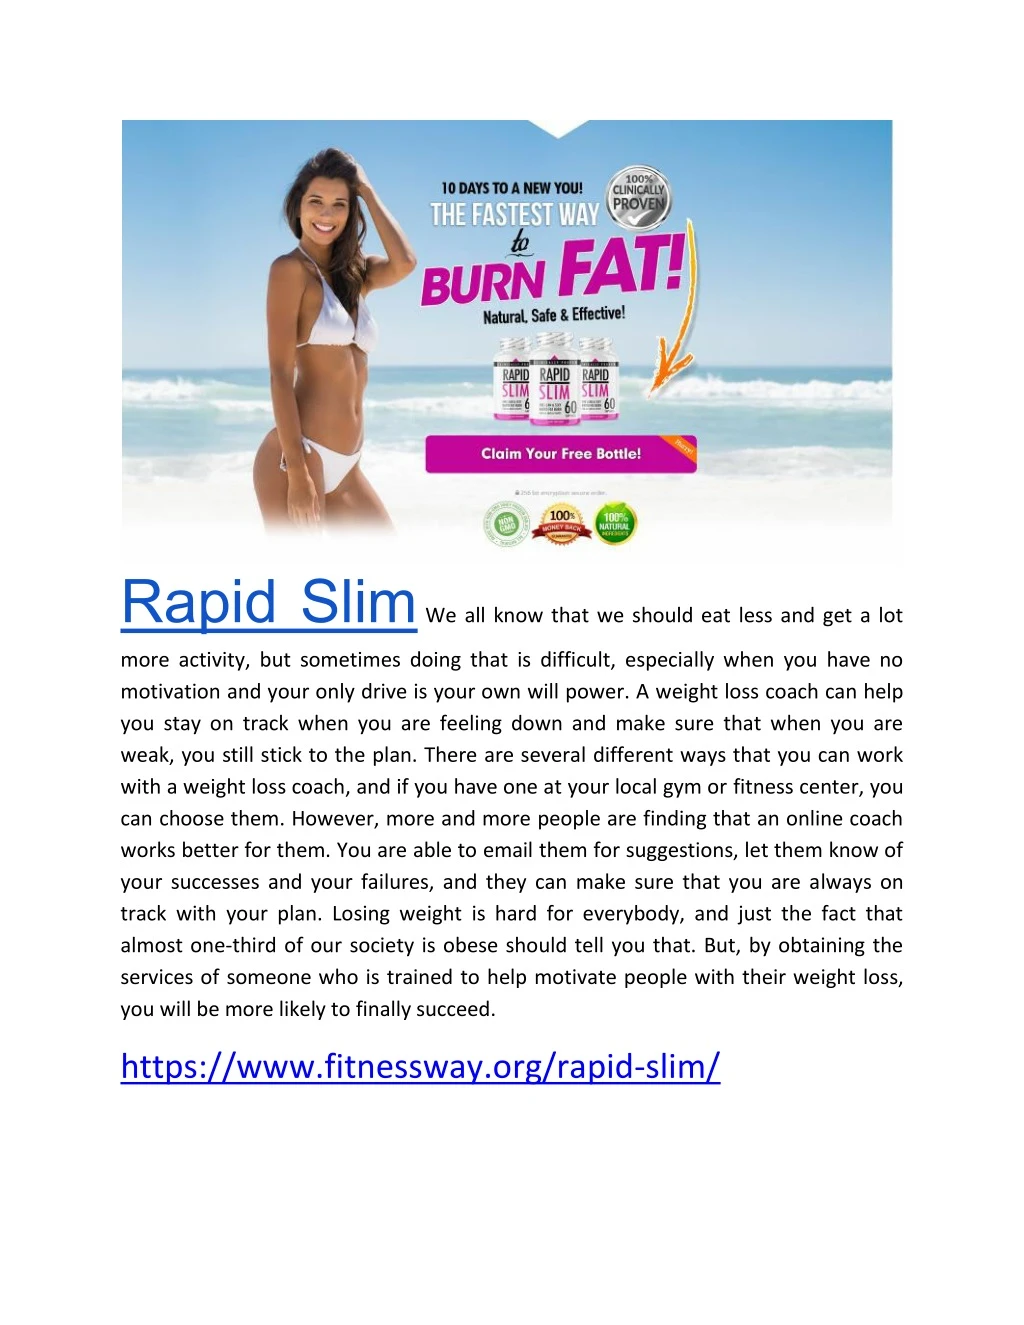 rapid slim we all know that we should eat less